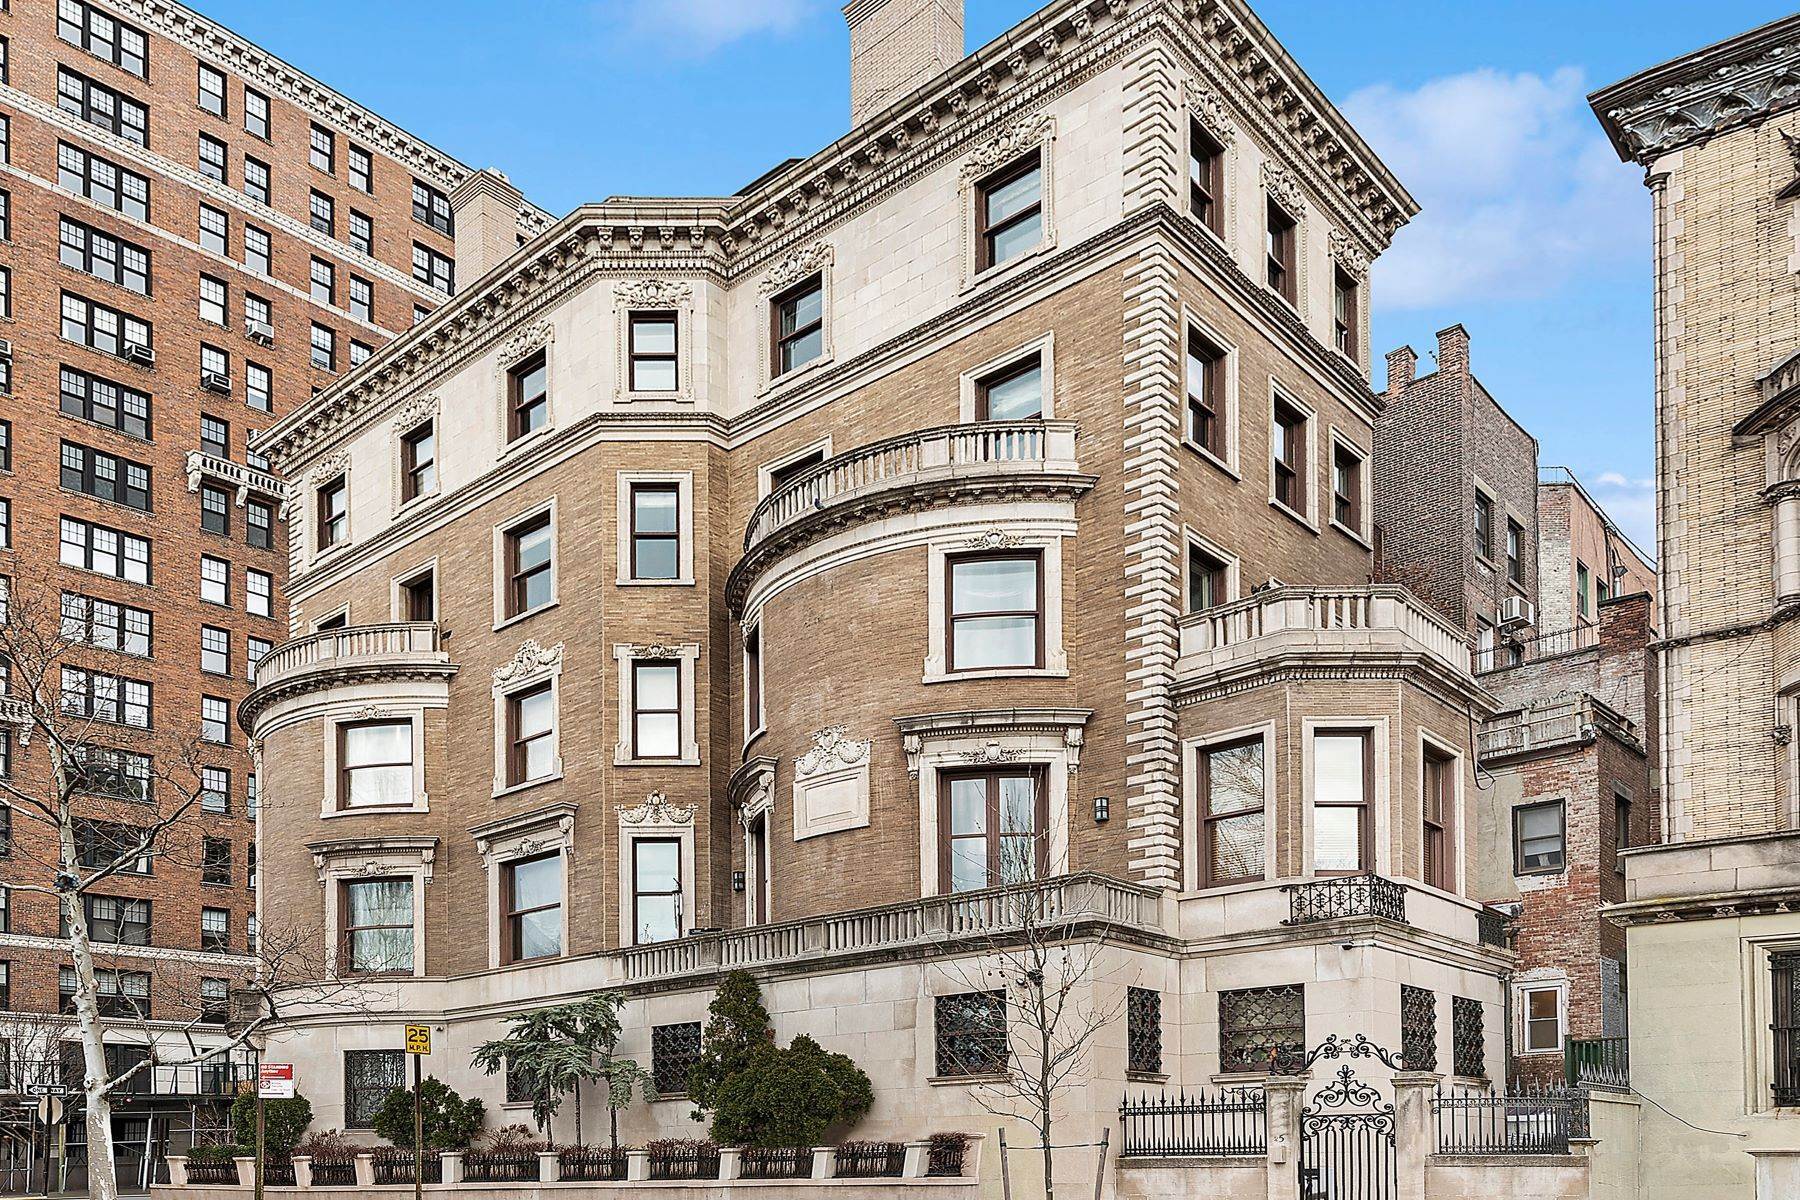 1. Townhouse at 25 Riverside Drive New York, New York 10023 United States